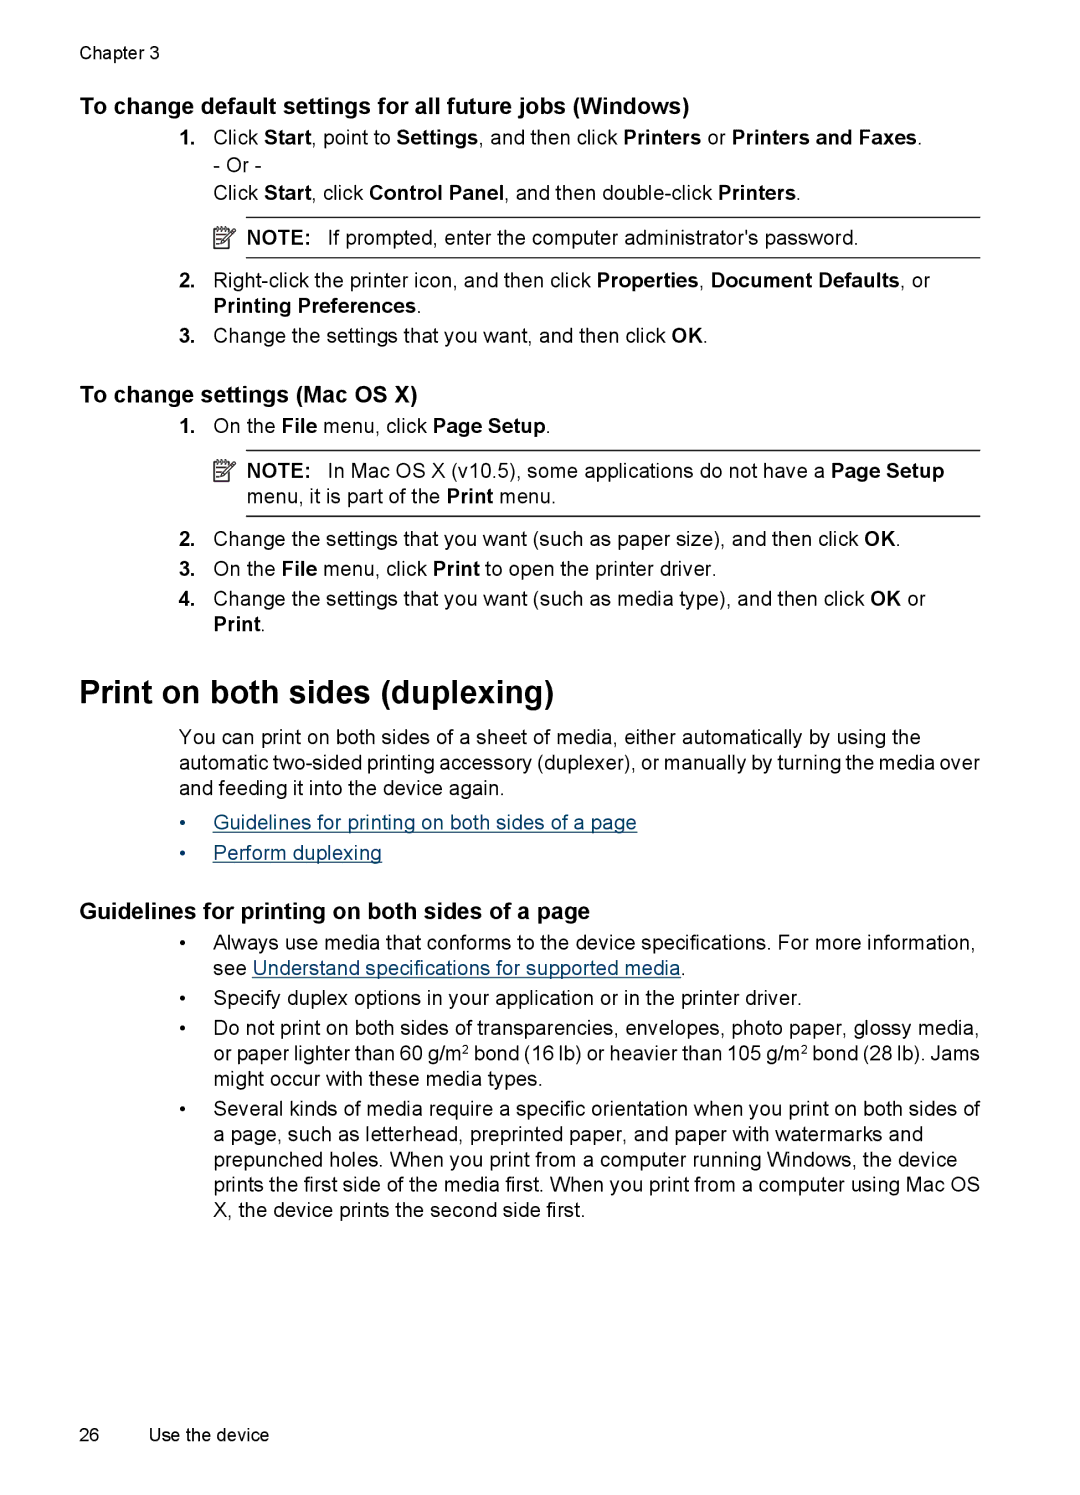 Hitachi E609, C9295A#B1H manual Print on both sides duplexing, To change default settings for all future jobs Windows 